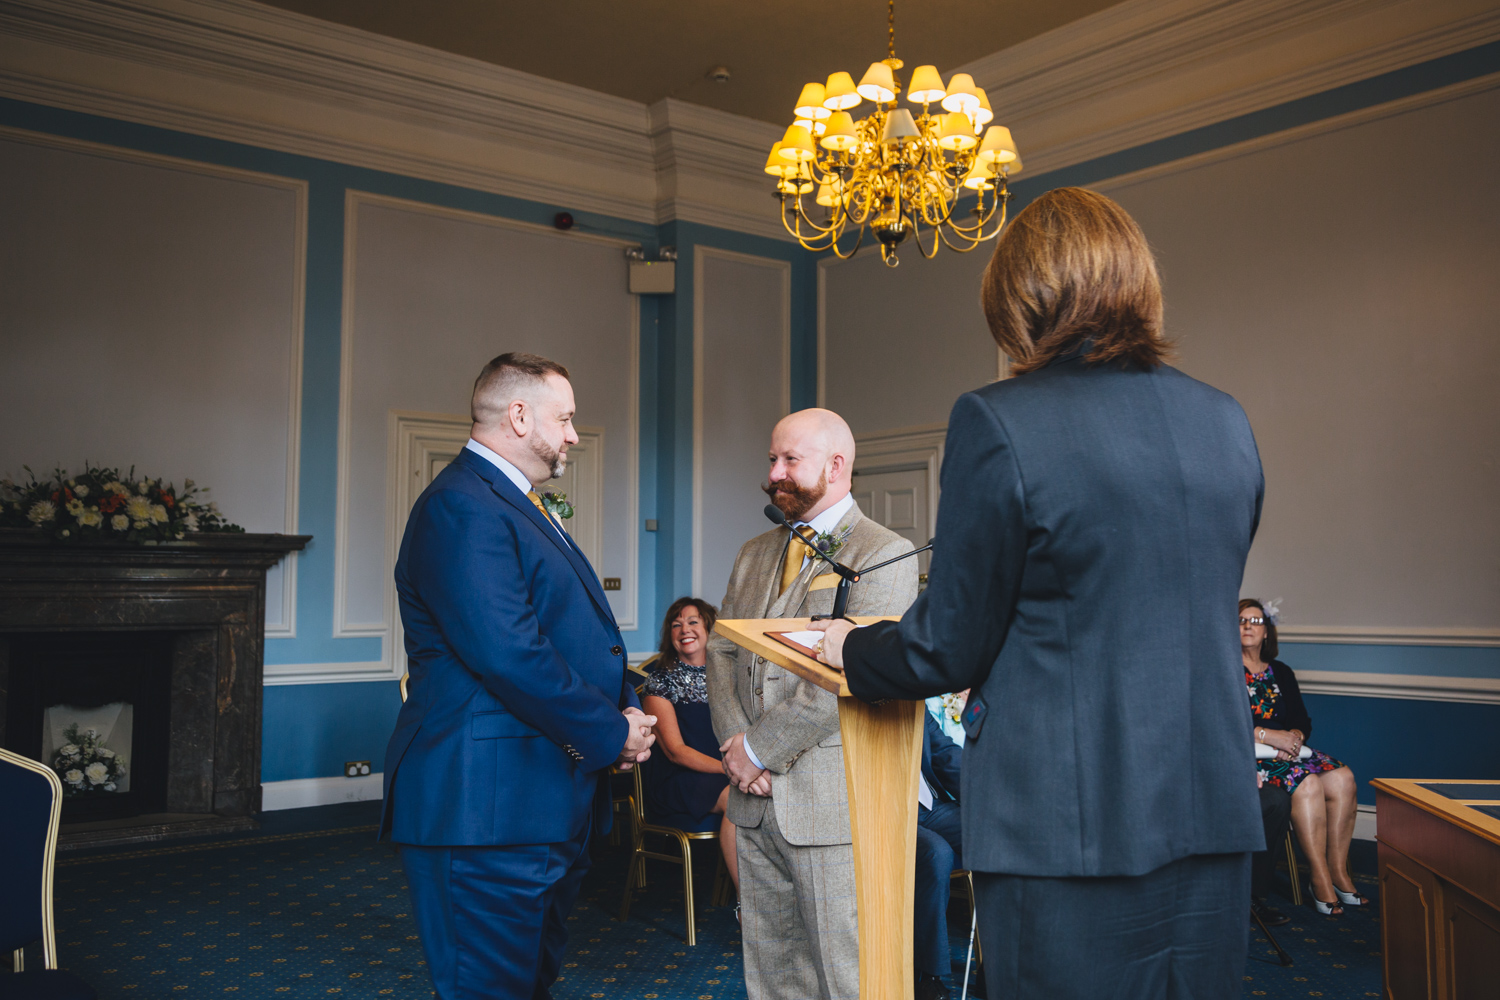 gay wedding ceremony for 2 grooms at cardiff city hall with gay friendly south wales wedding photographer